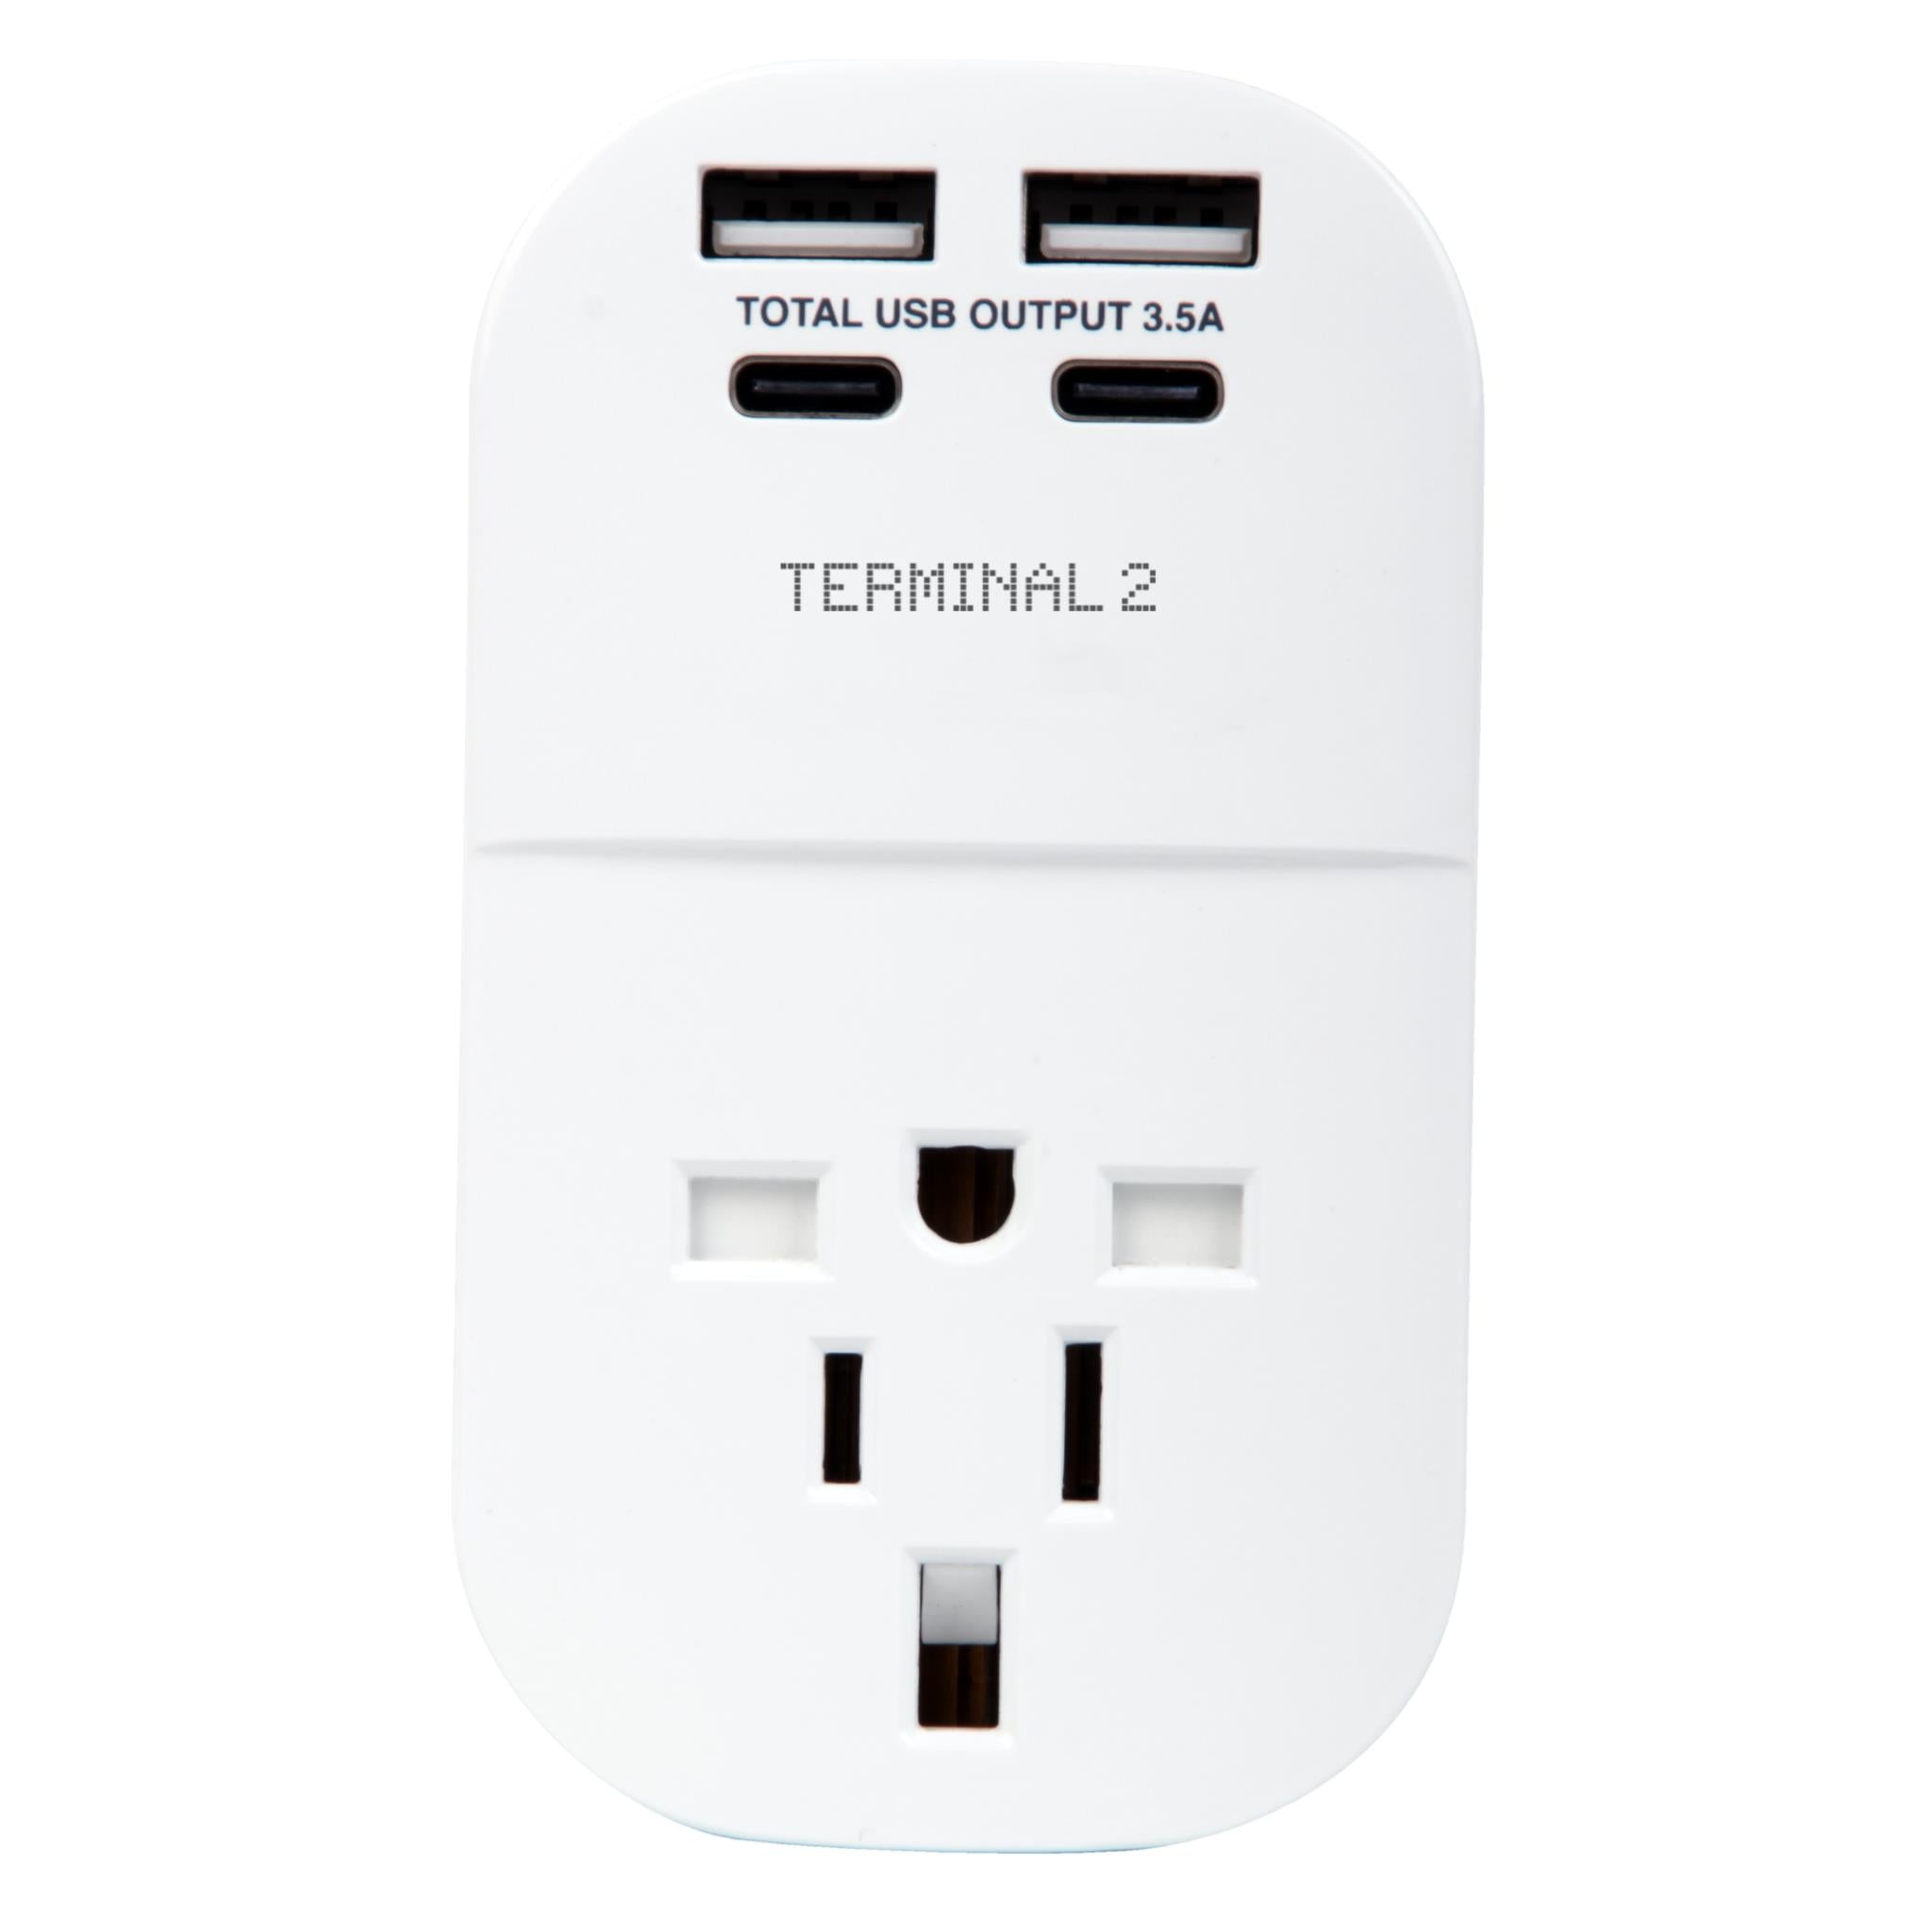 terminal 2 inbound travel adapter with 4 usb ports from usa, japan, uk, hong kong and more